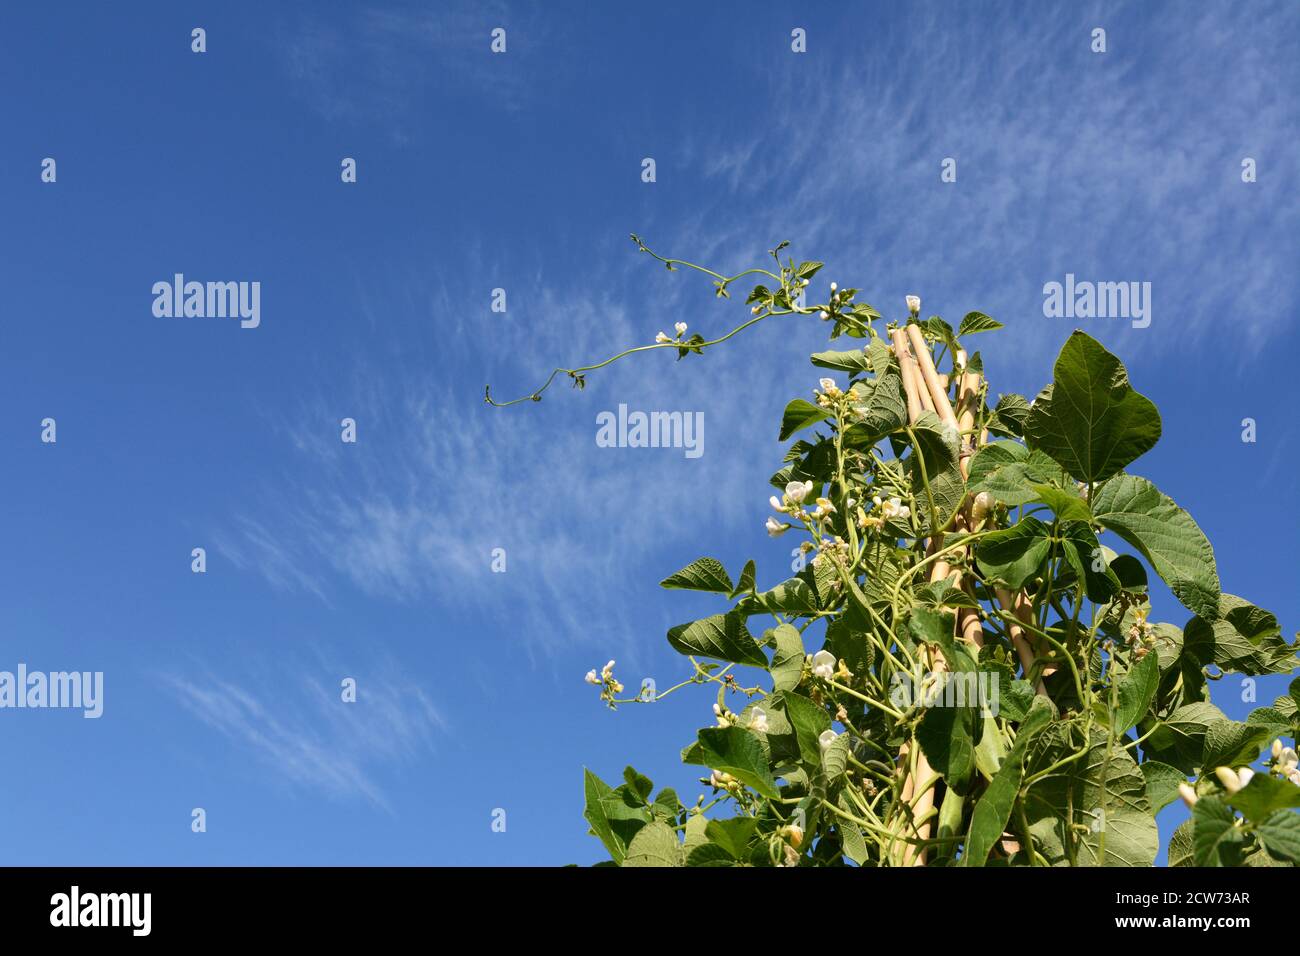 Tall wigwam of Wey runner bean vines with white flowers. Long tendril reaching out against blue summer sky. Stock Photo